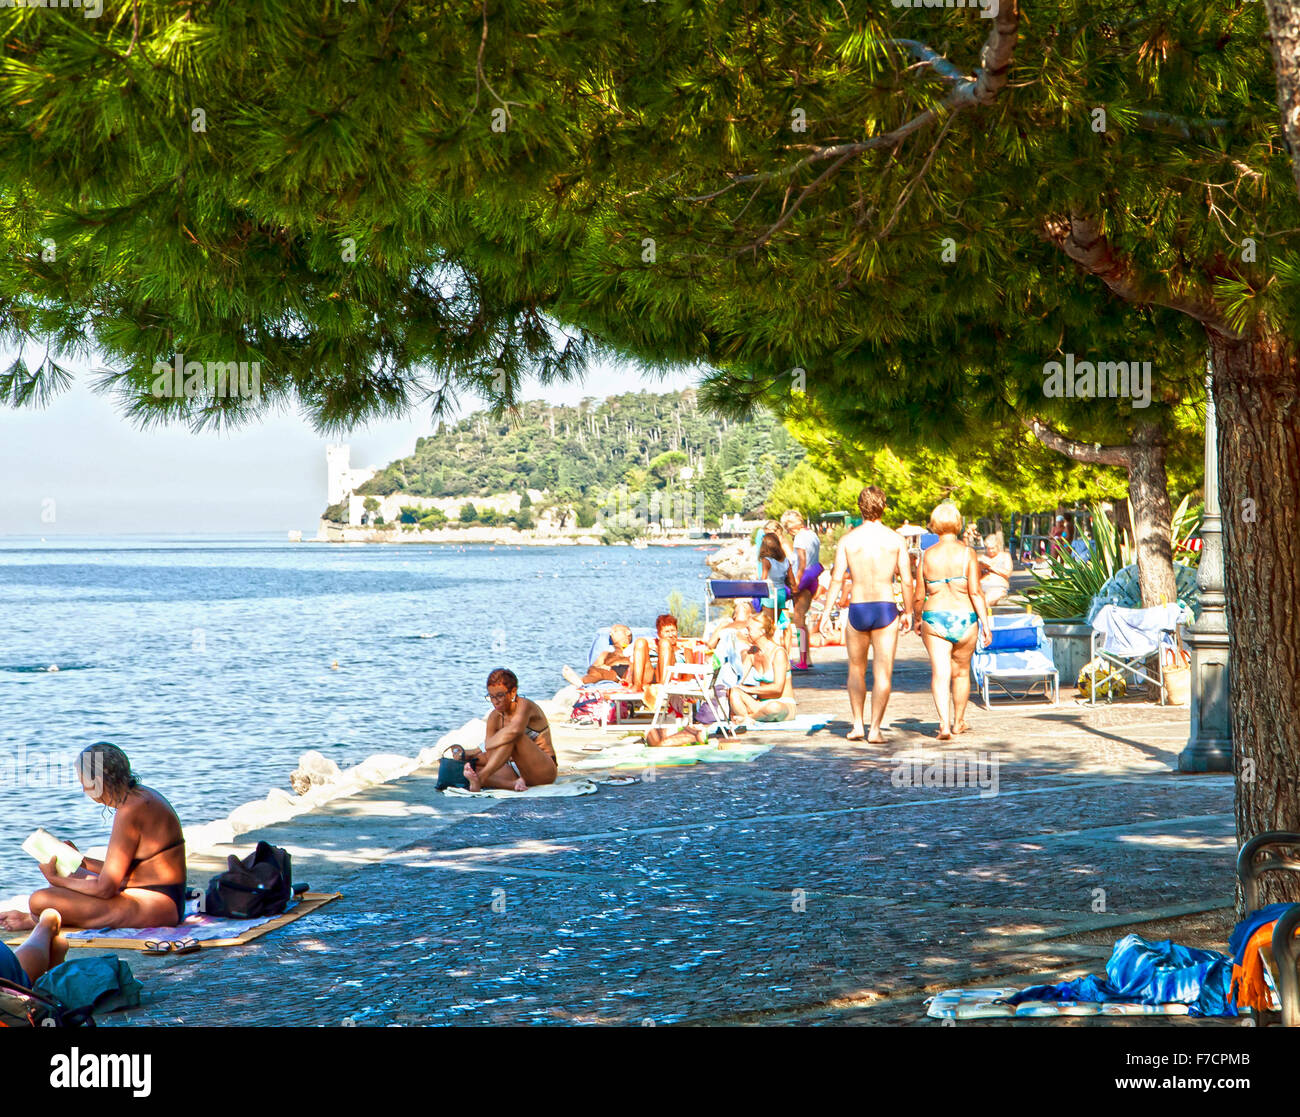 Trieste, Italy, beautiful summer view of Barcola promenade and free bathing strand with people sun bathing, relaxing, walking Stock Photo